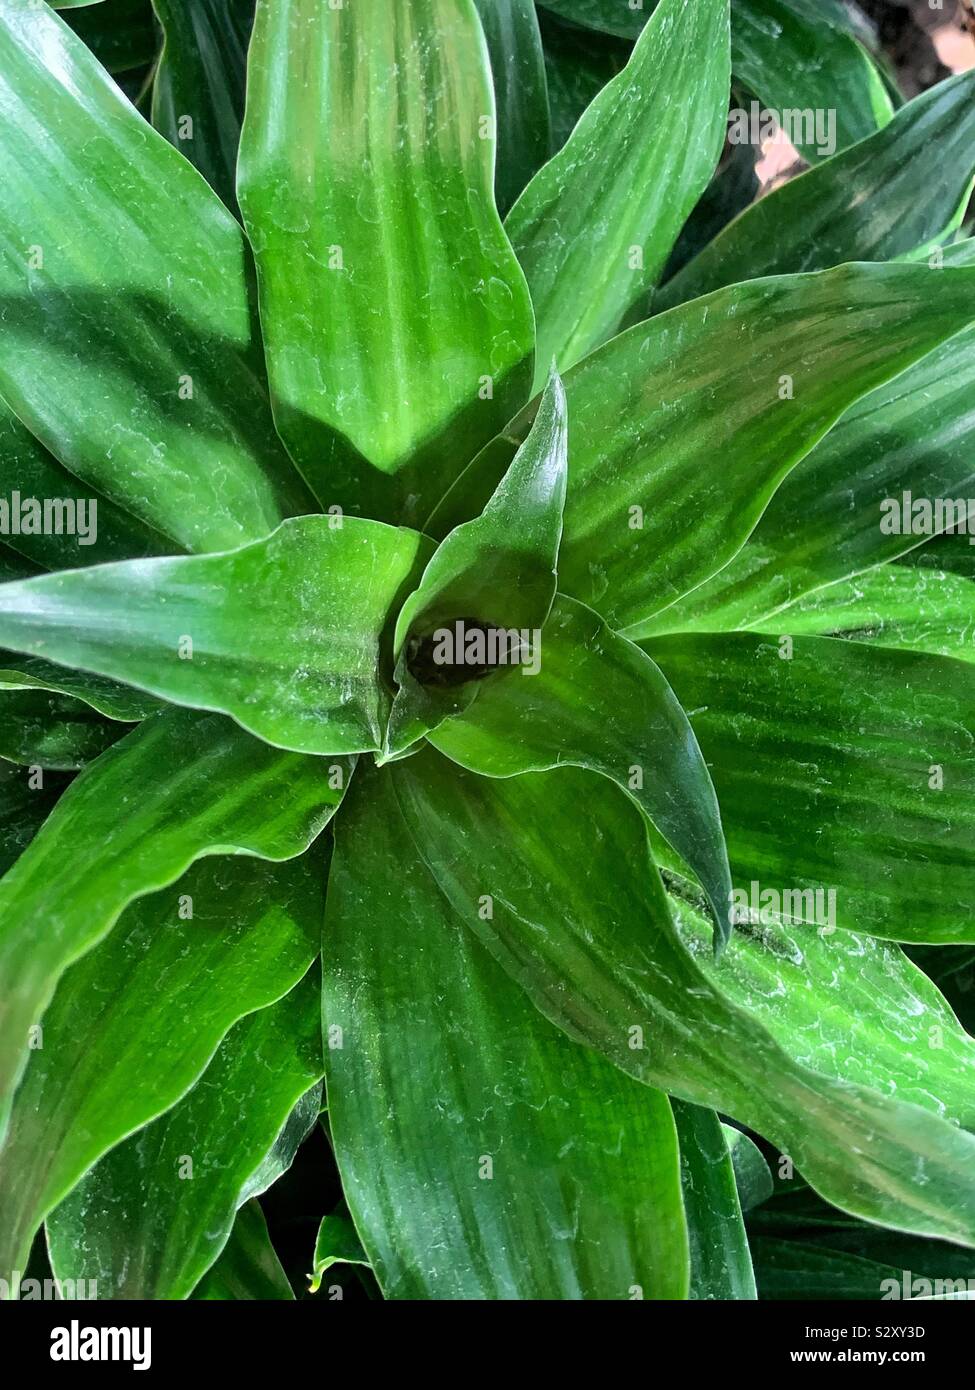 Top view of a garden fresh green bromeliad plant in full bloom. Stock Photo